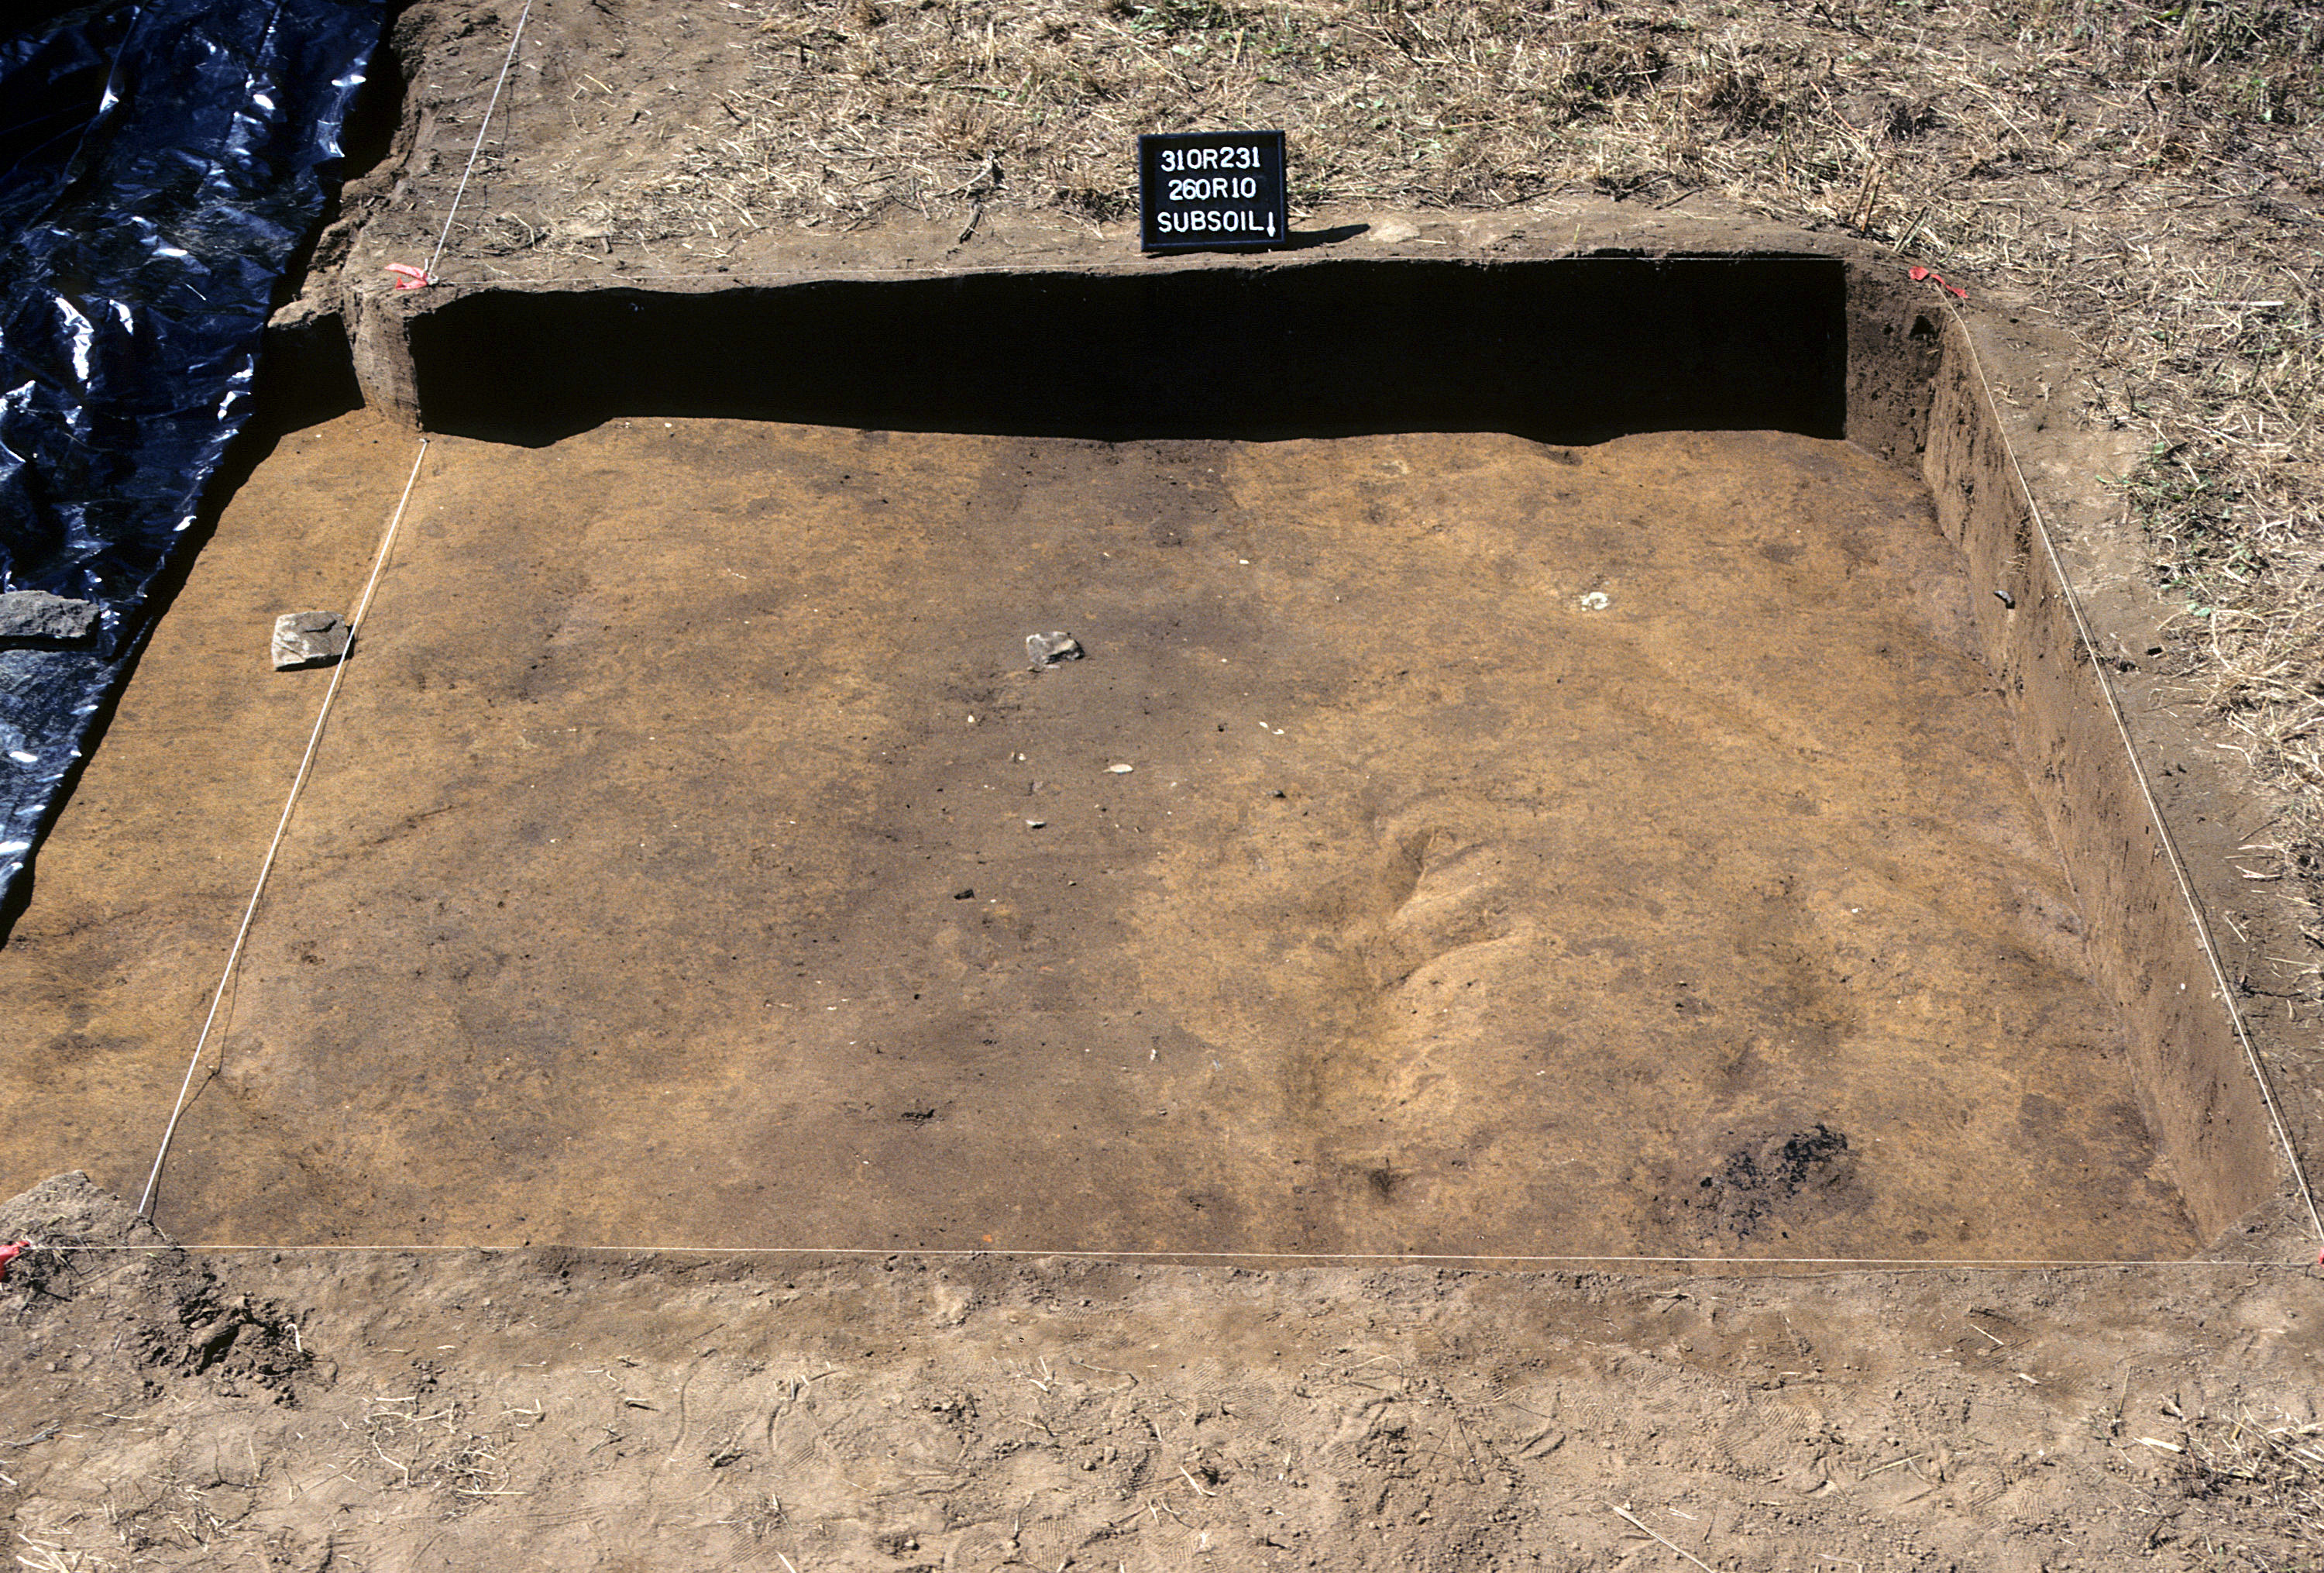 Figure 897. Sq. 260R10 at top of subsoil (view to south).